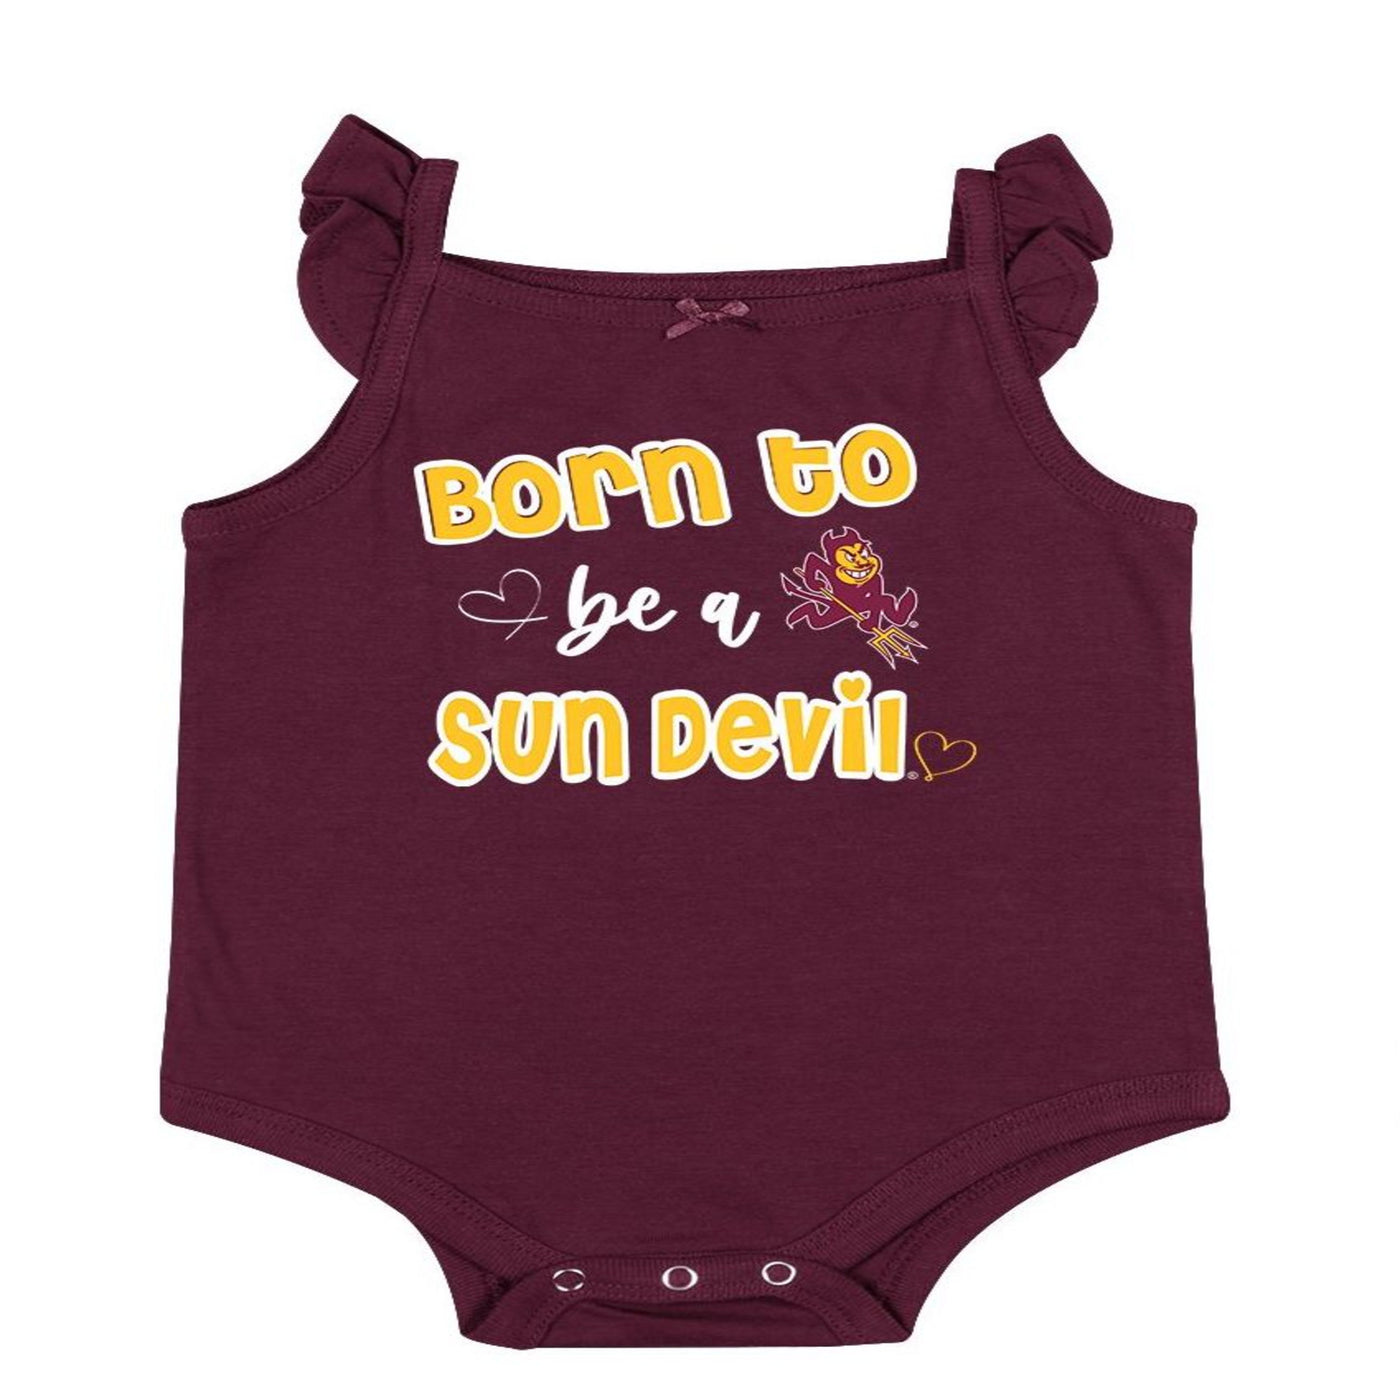 ASU maroon onesie with the text 